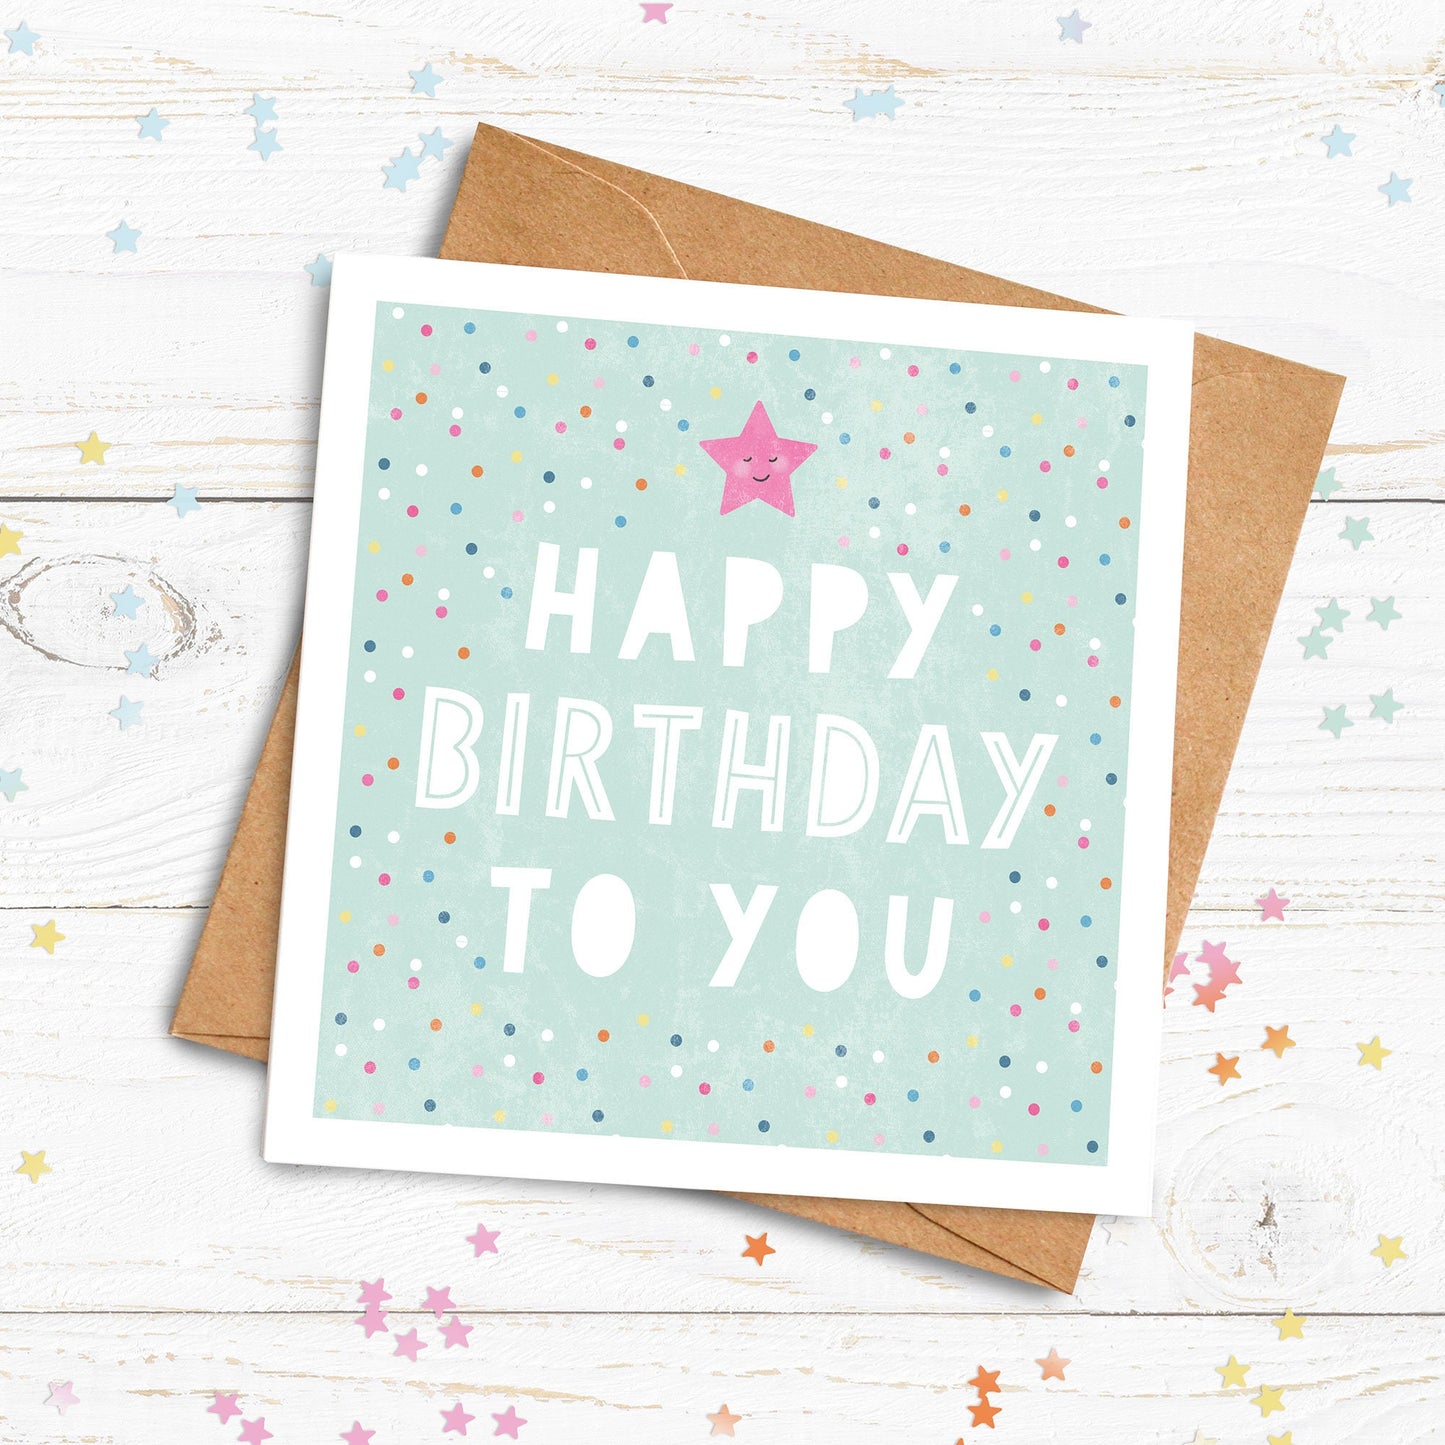 Happy Birthday To You Personalised Card - Teal. Birthday Card. Celebration Card. Send Direct Option